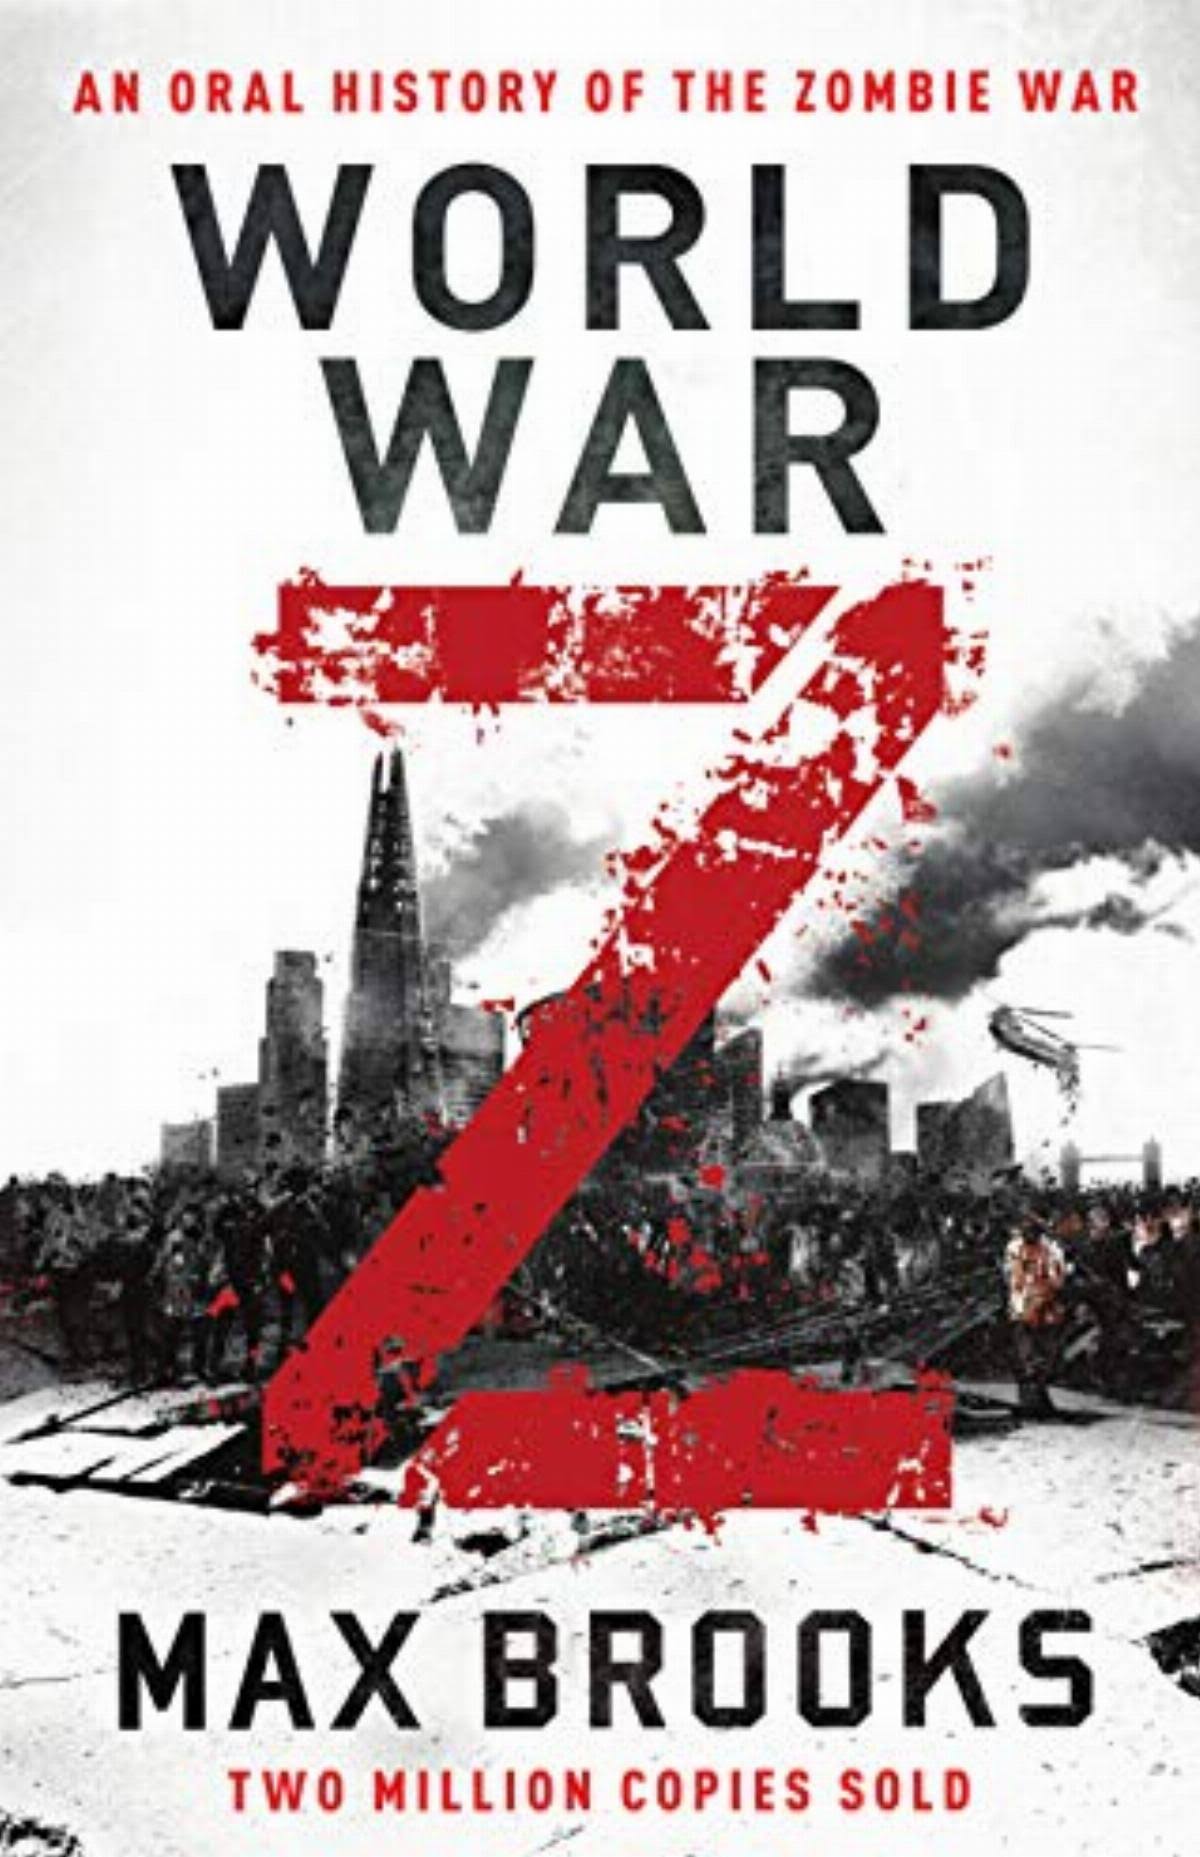 World War Z: An Oral History of the Zombie War [Book]